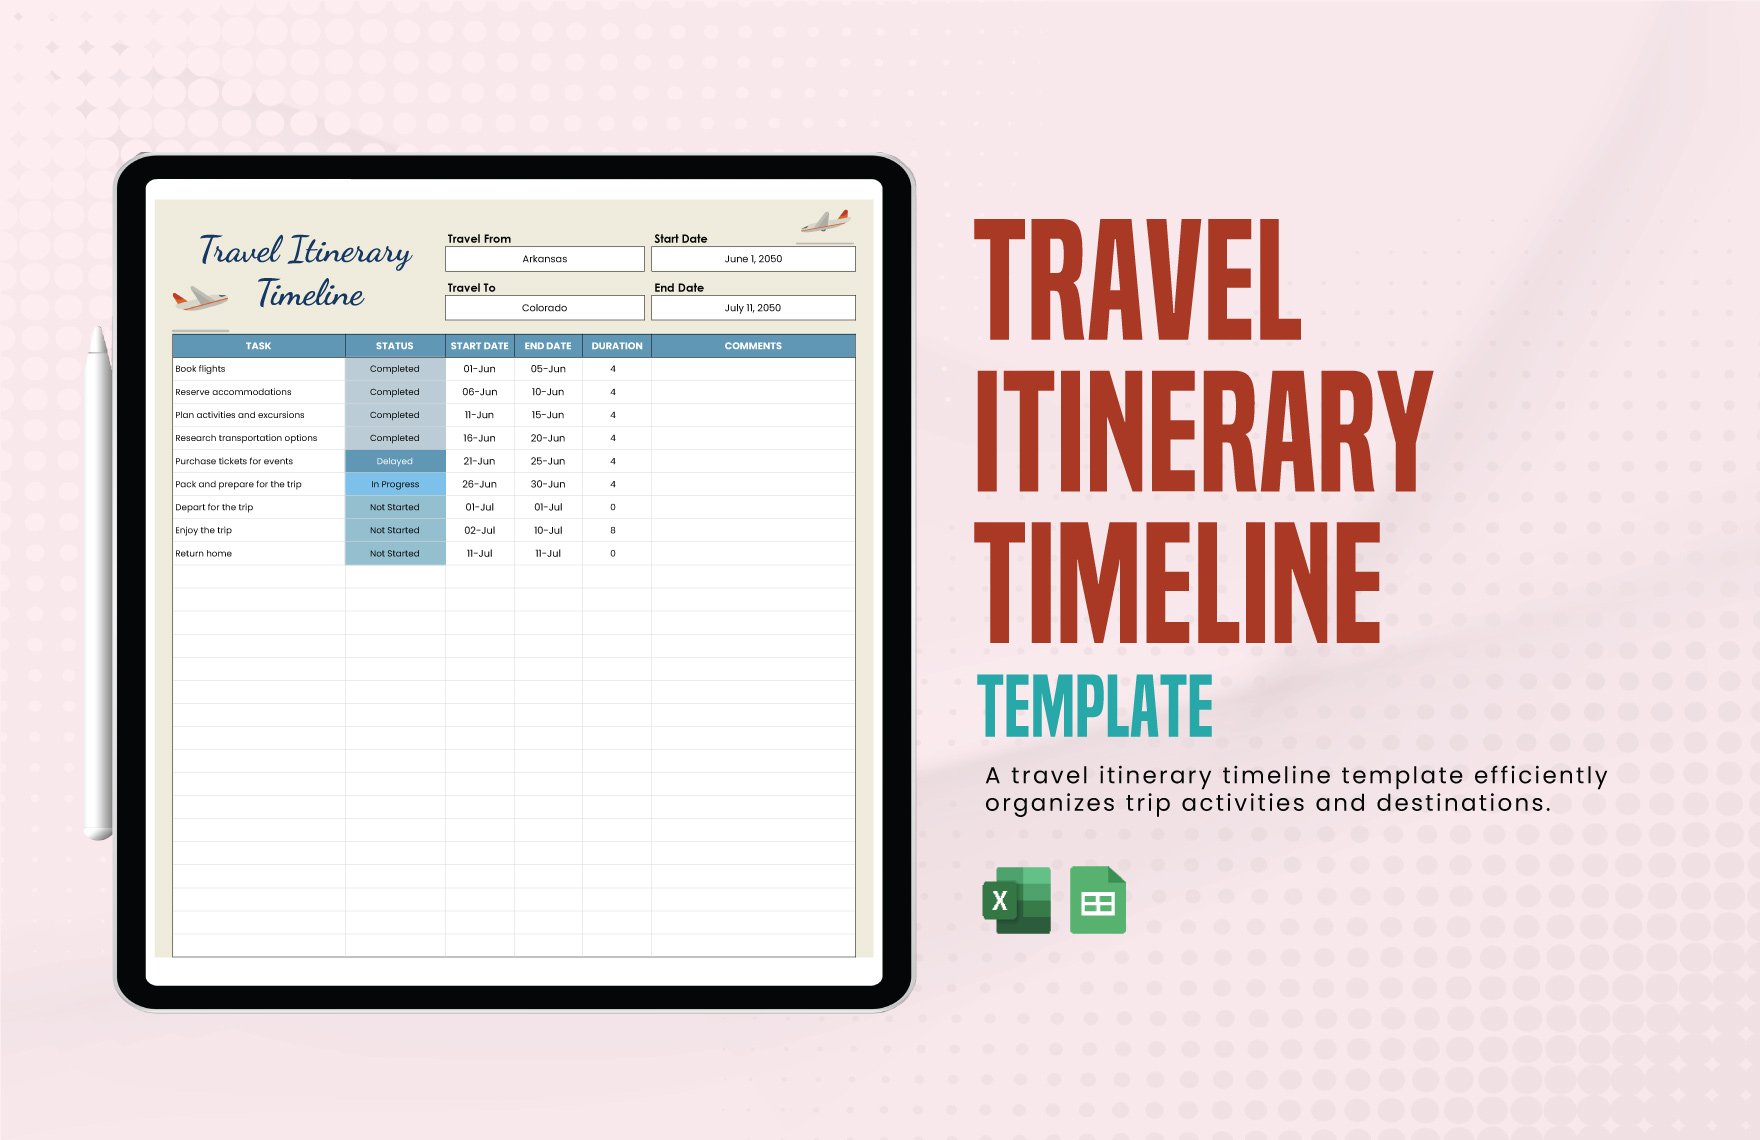 Travel Itinerary Timeline Template